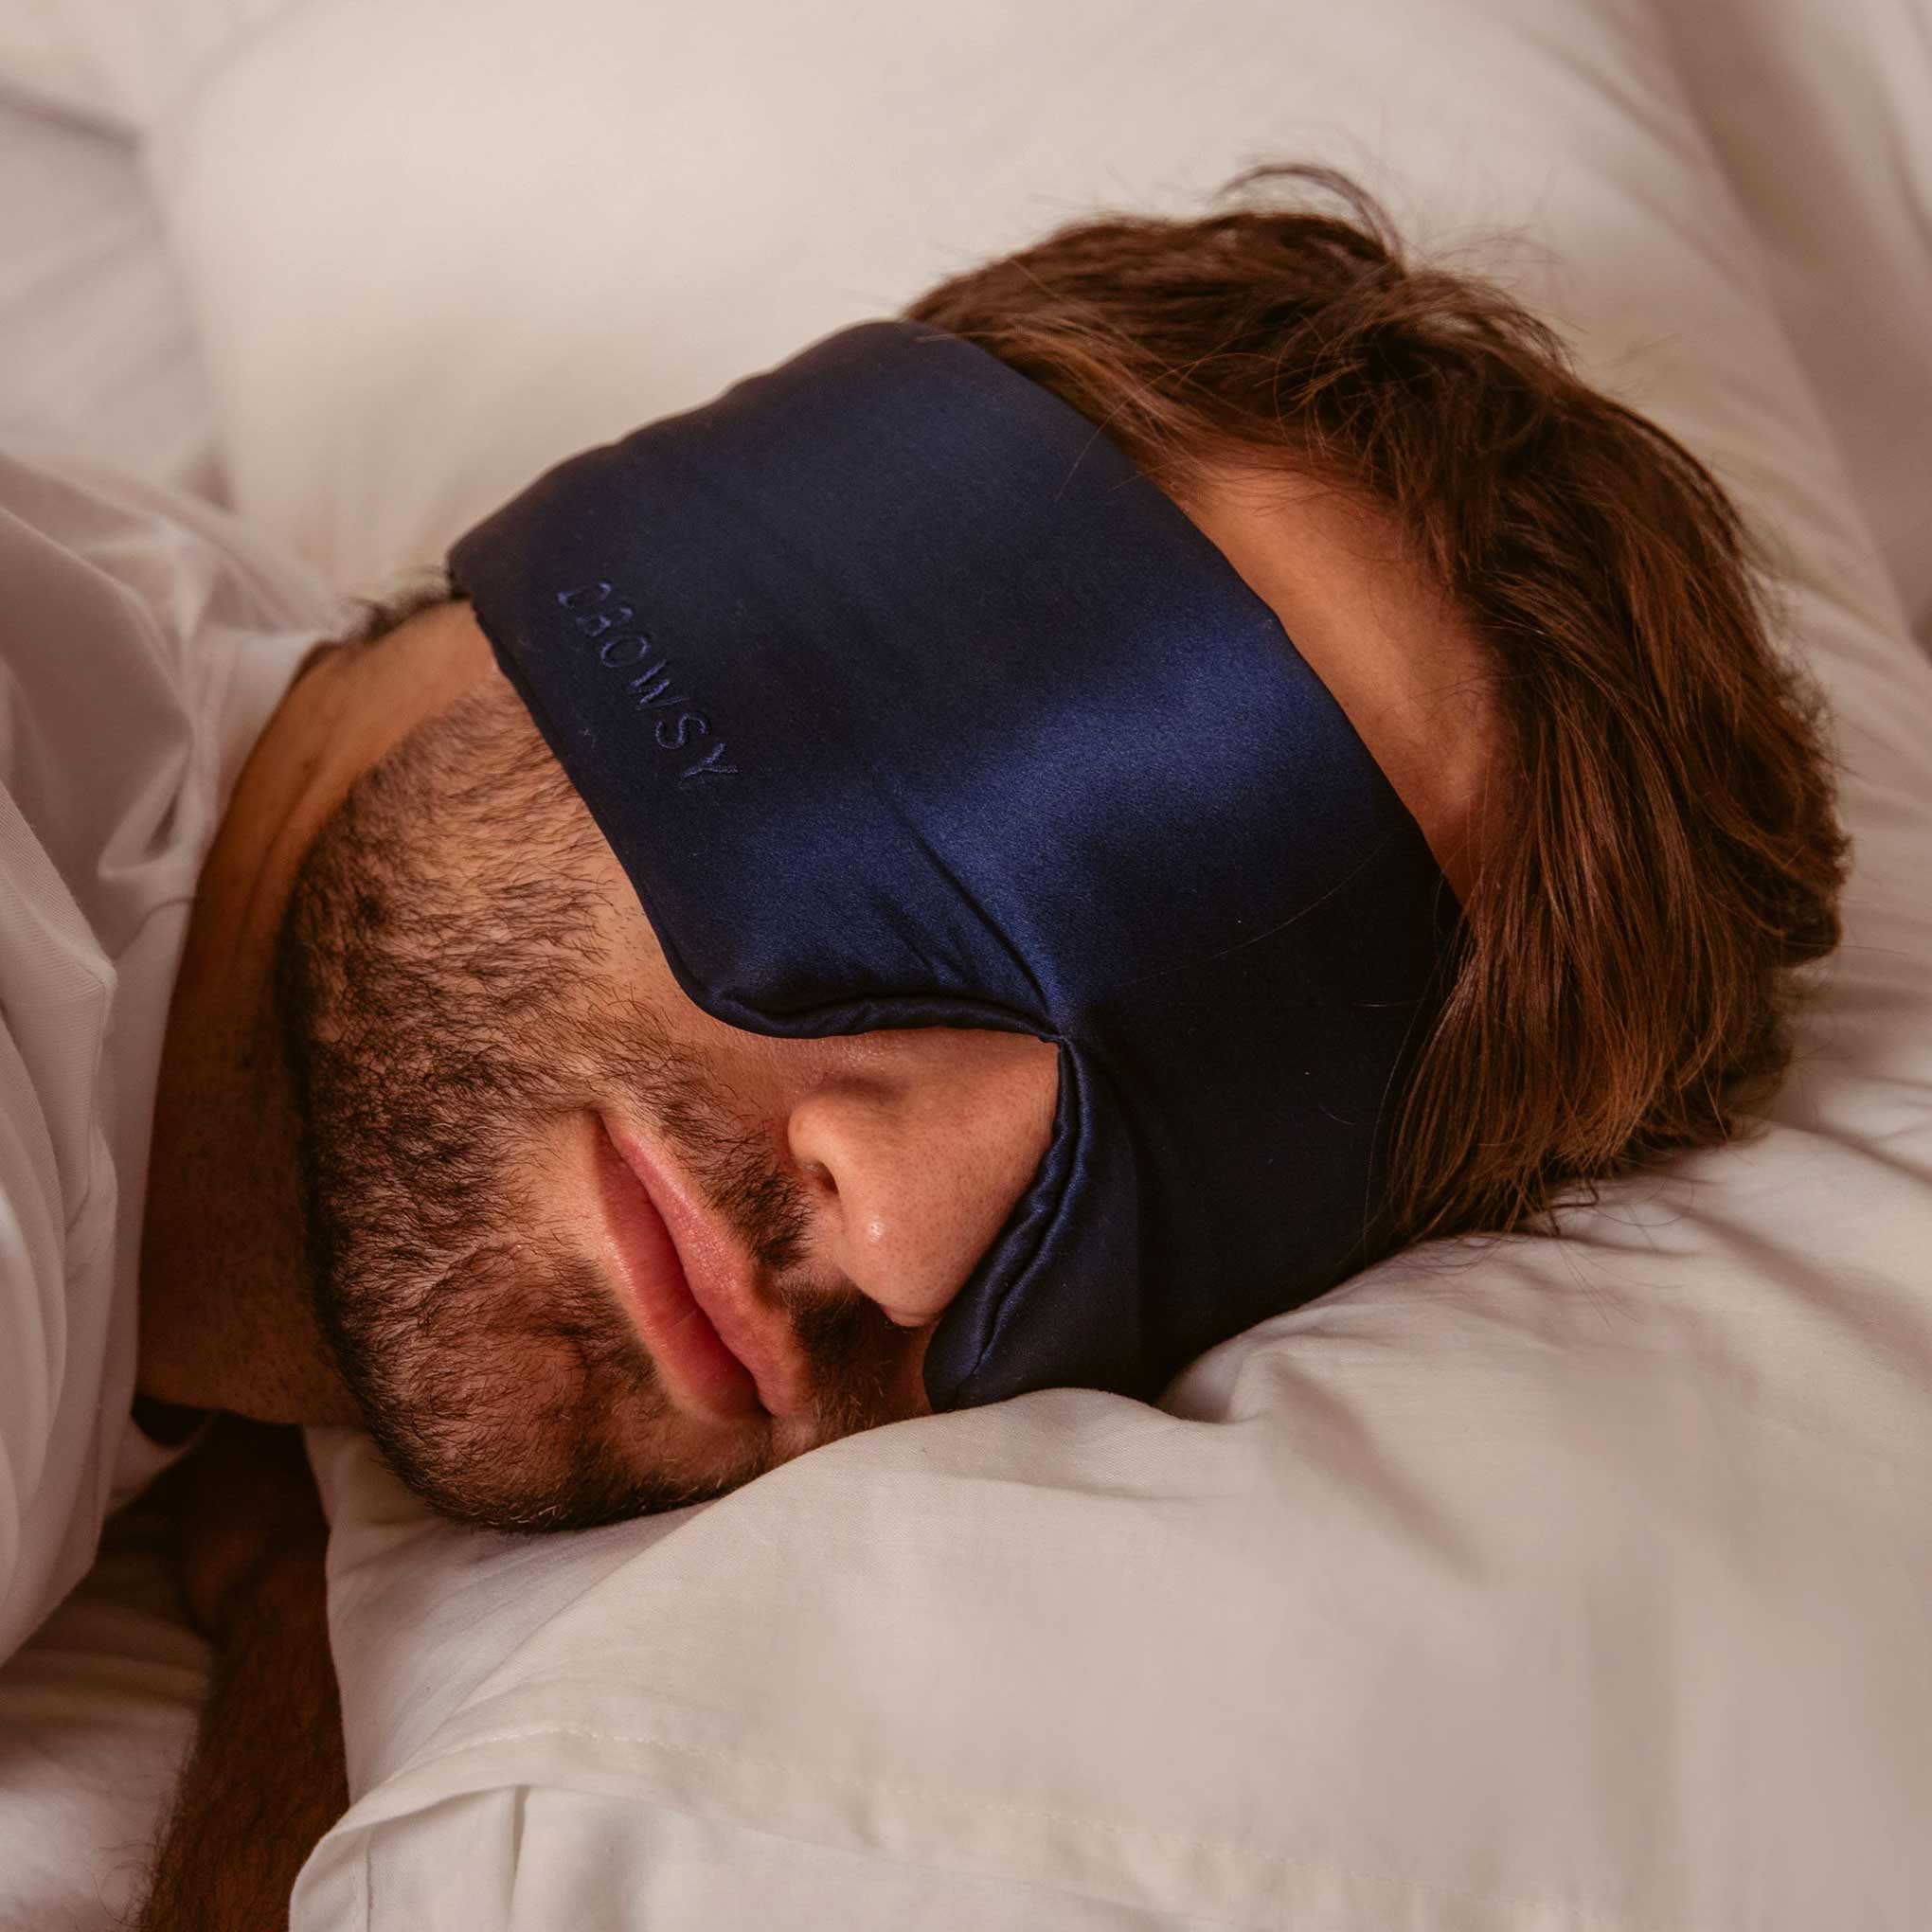 Man sleeping on white bedsheets with a blue Drowsy silk sleep mask covering his eyes